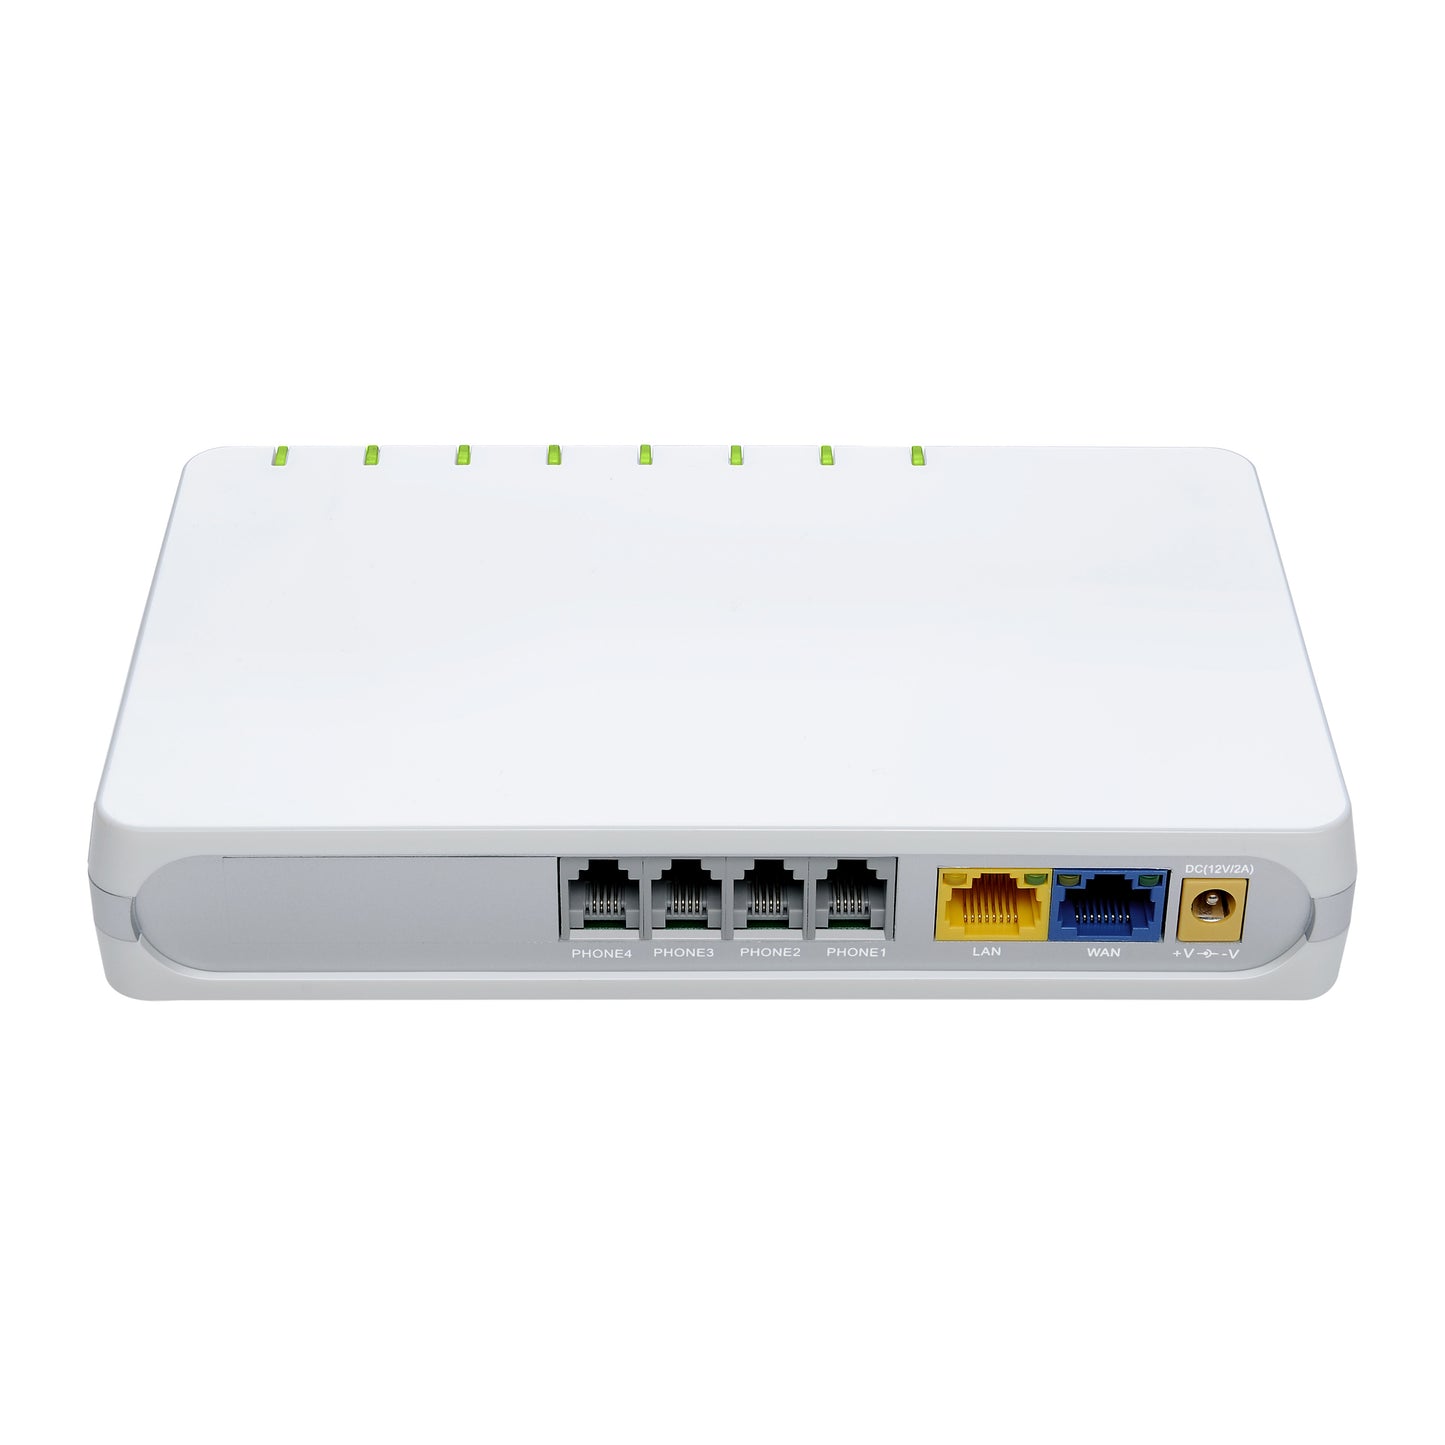 G504 Gigabit VoIP ATA With 4 FXS Ports